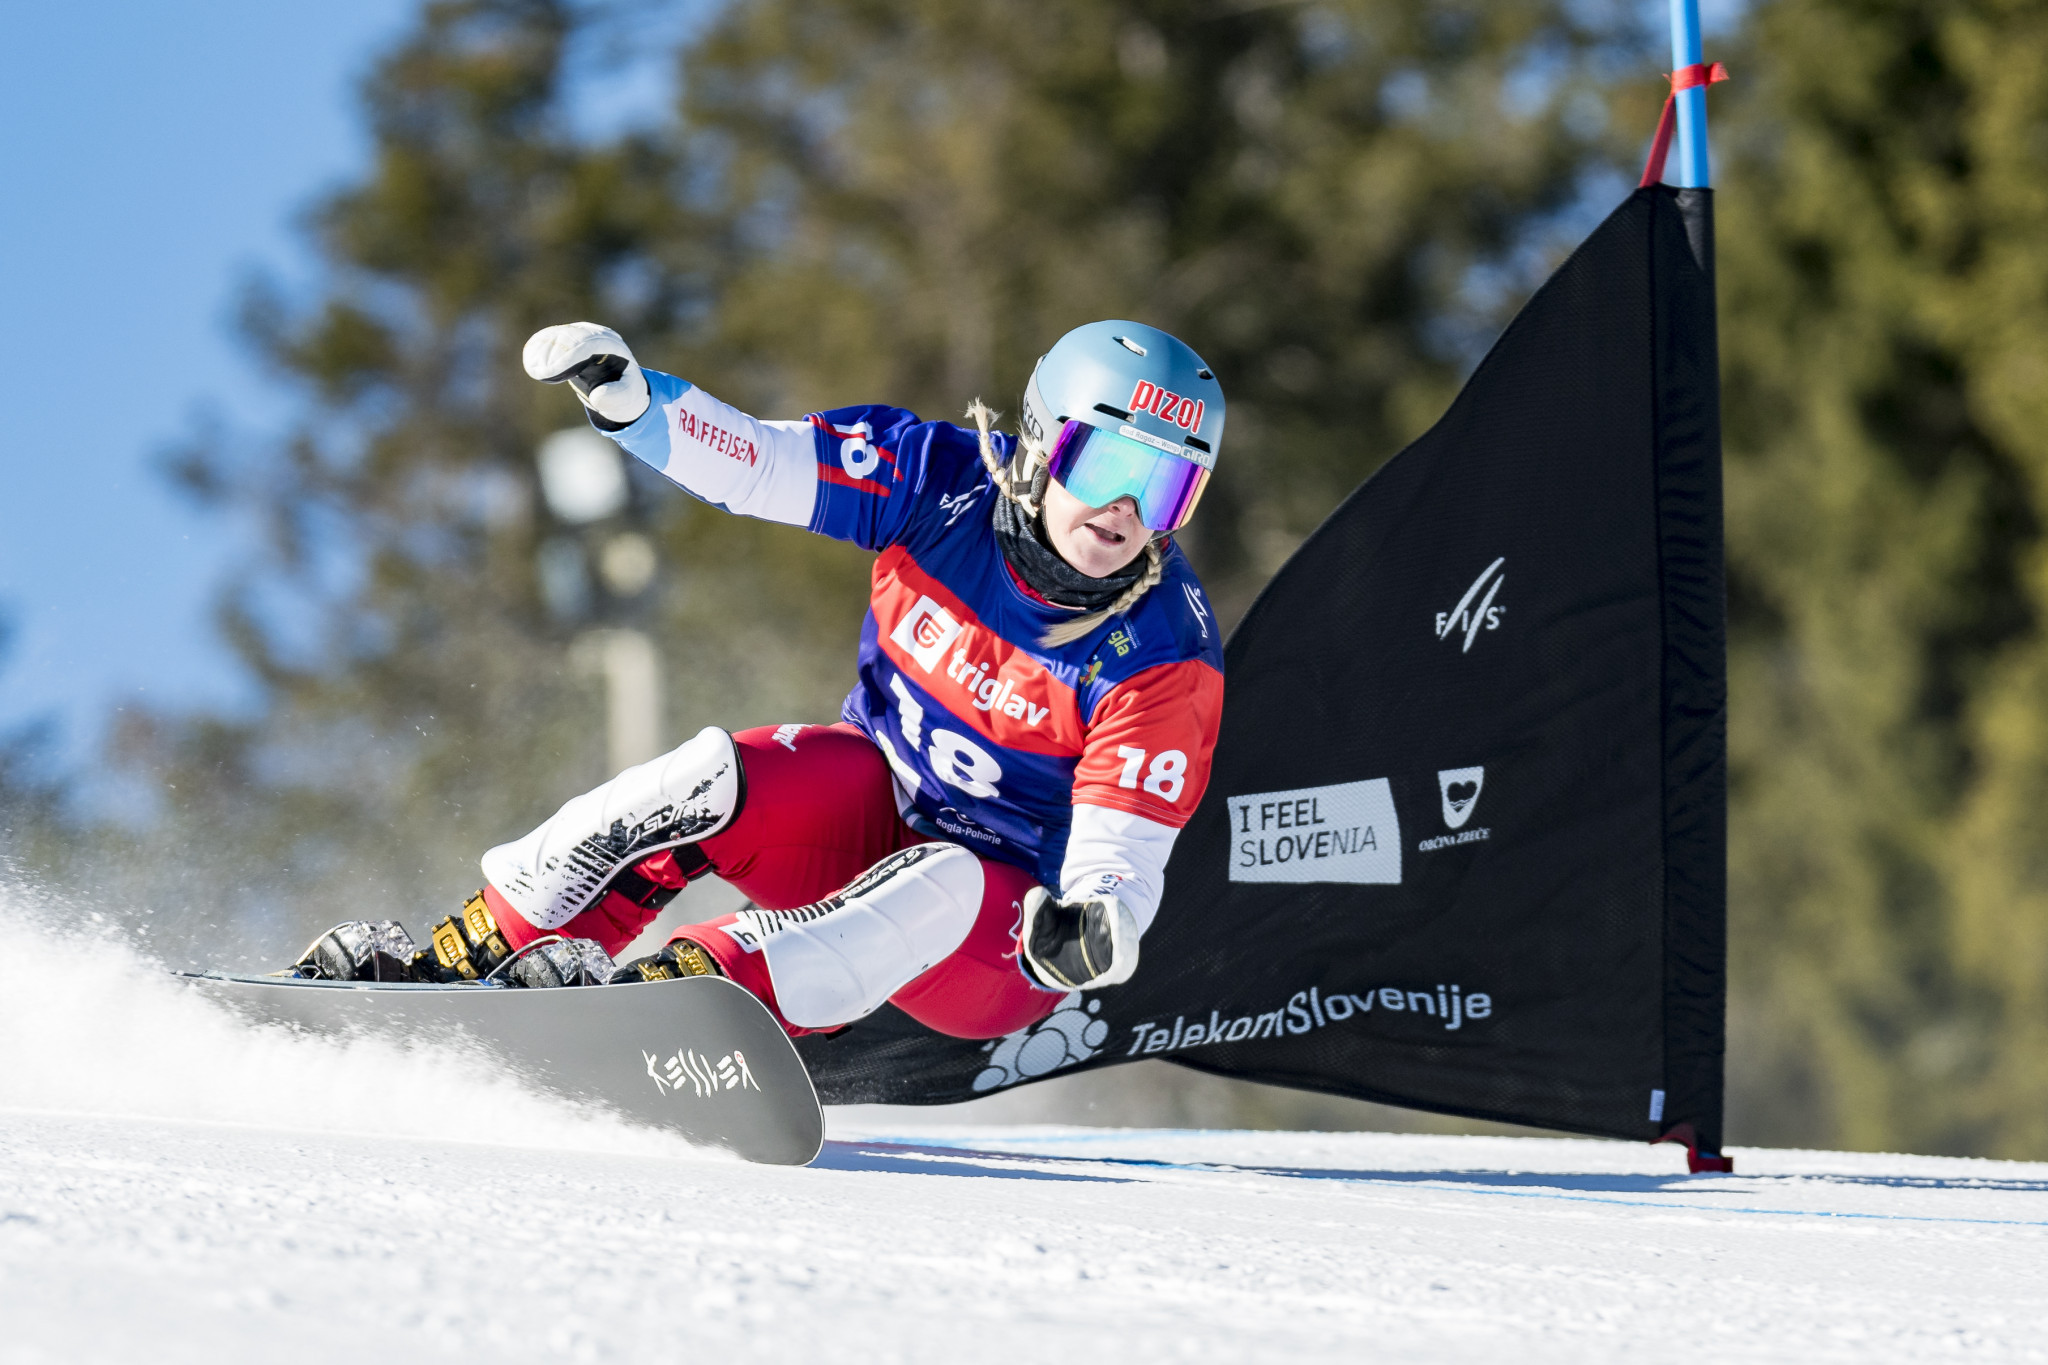 World Cup champion Julie Zogg is one of 13 members of the Swiss Snowboard national team ©Getty Images